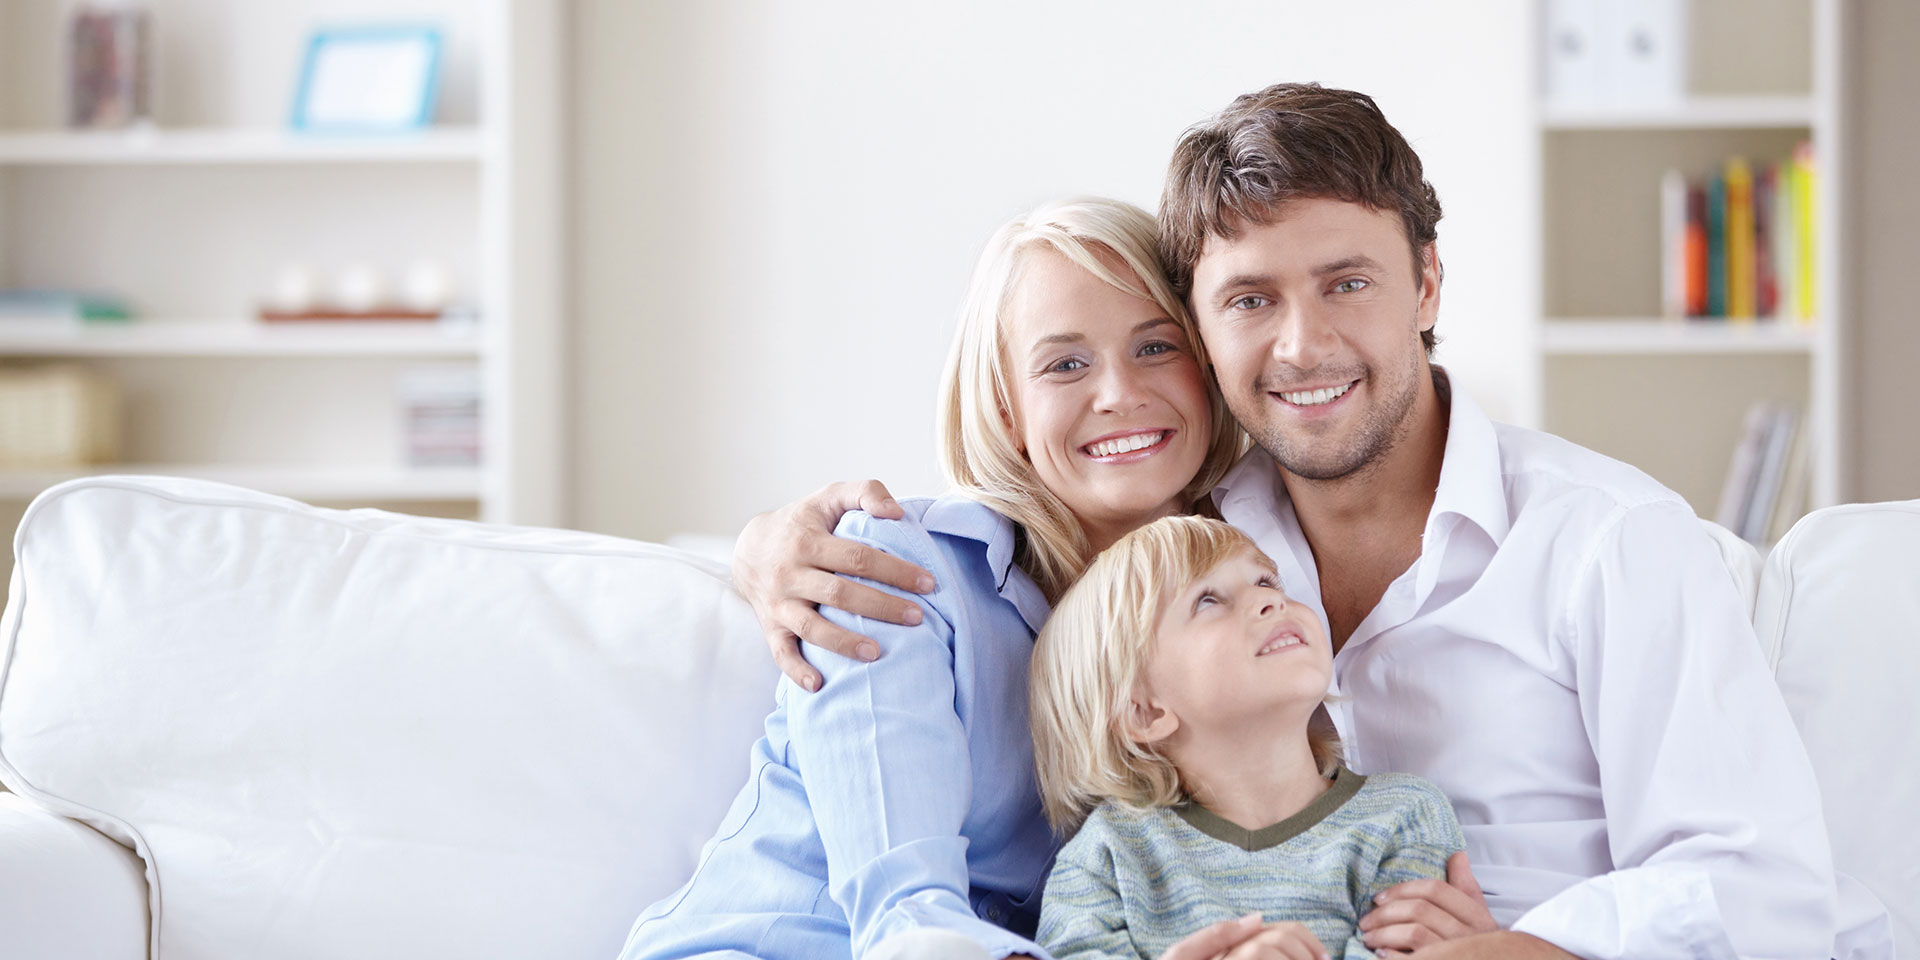 picture of family smiling on couch